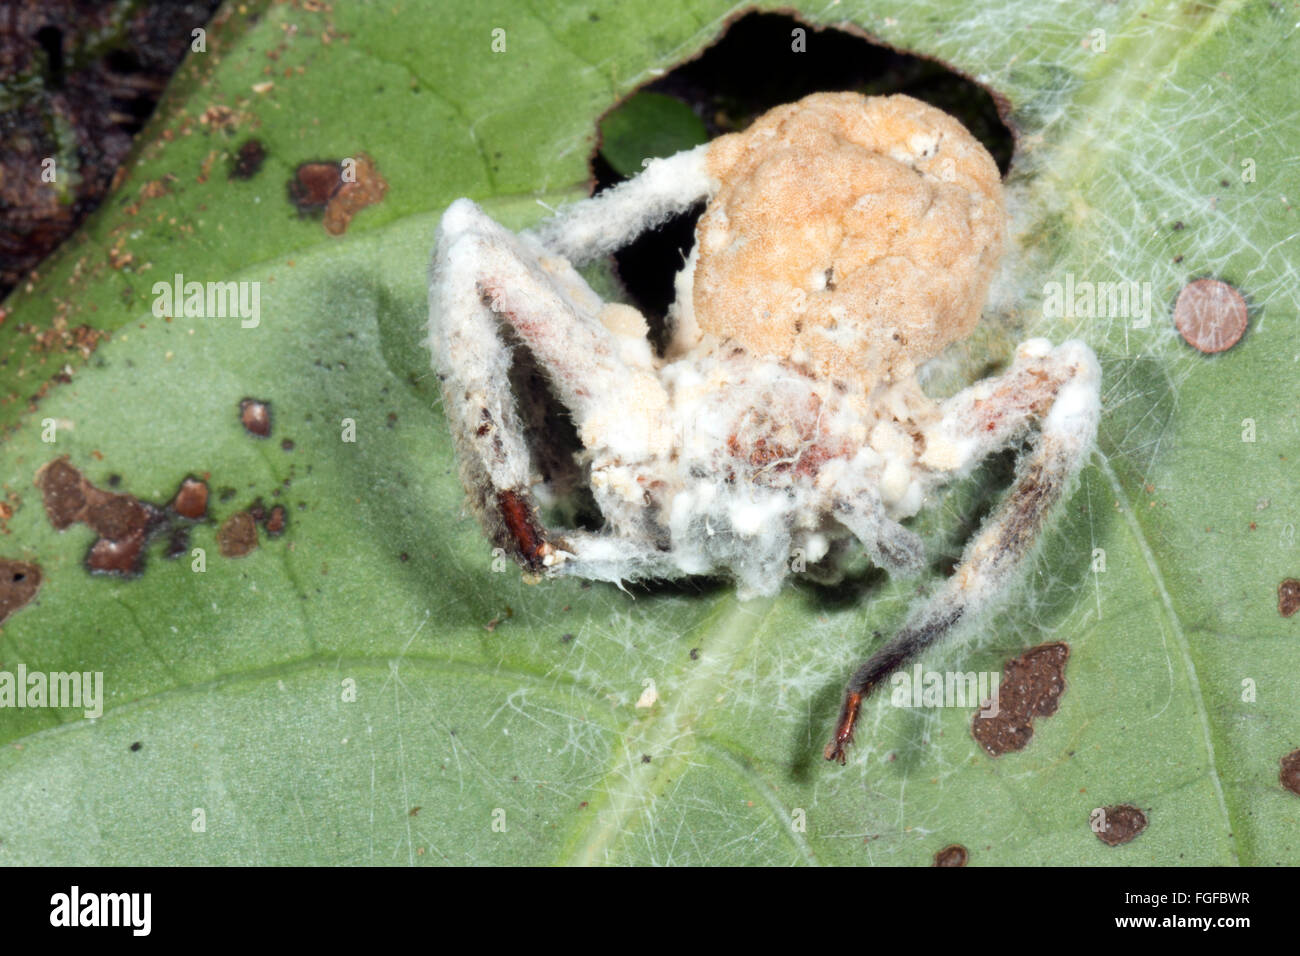 Cordyceps fungus (Torrubiella sp.) infecting a spider in the rainforest understory, Pastaza province, Ecuador Stock Photo